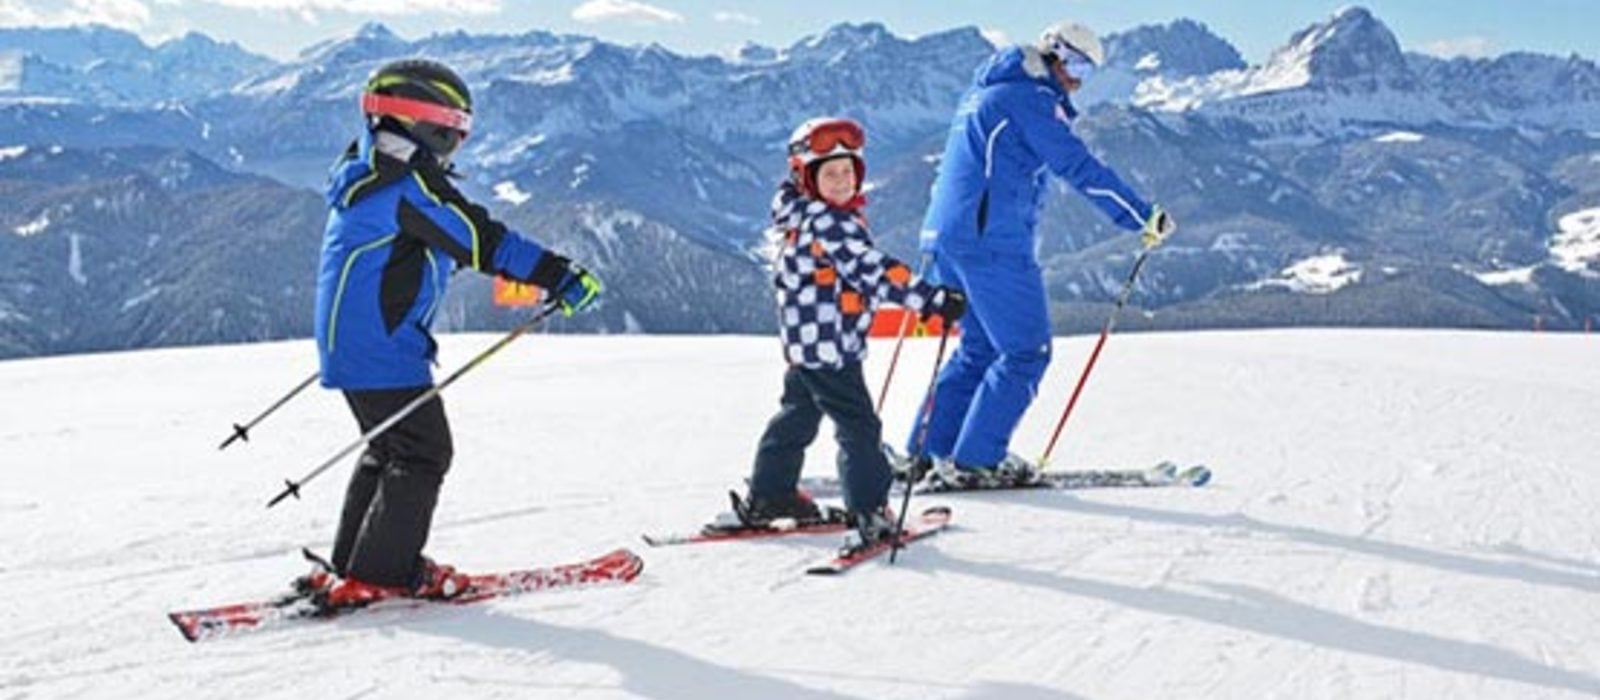 Children and Skiing: essential tips to get started